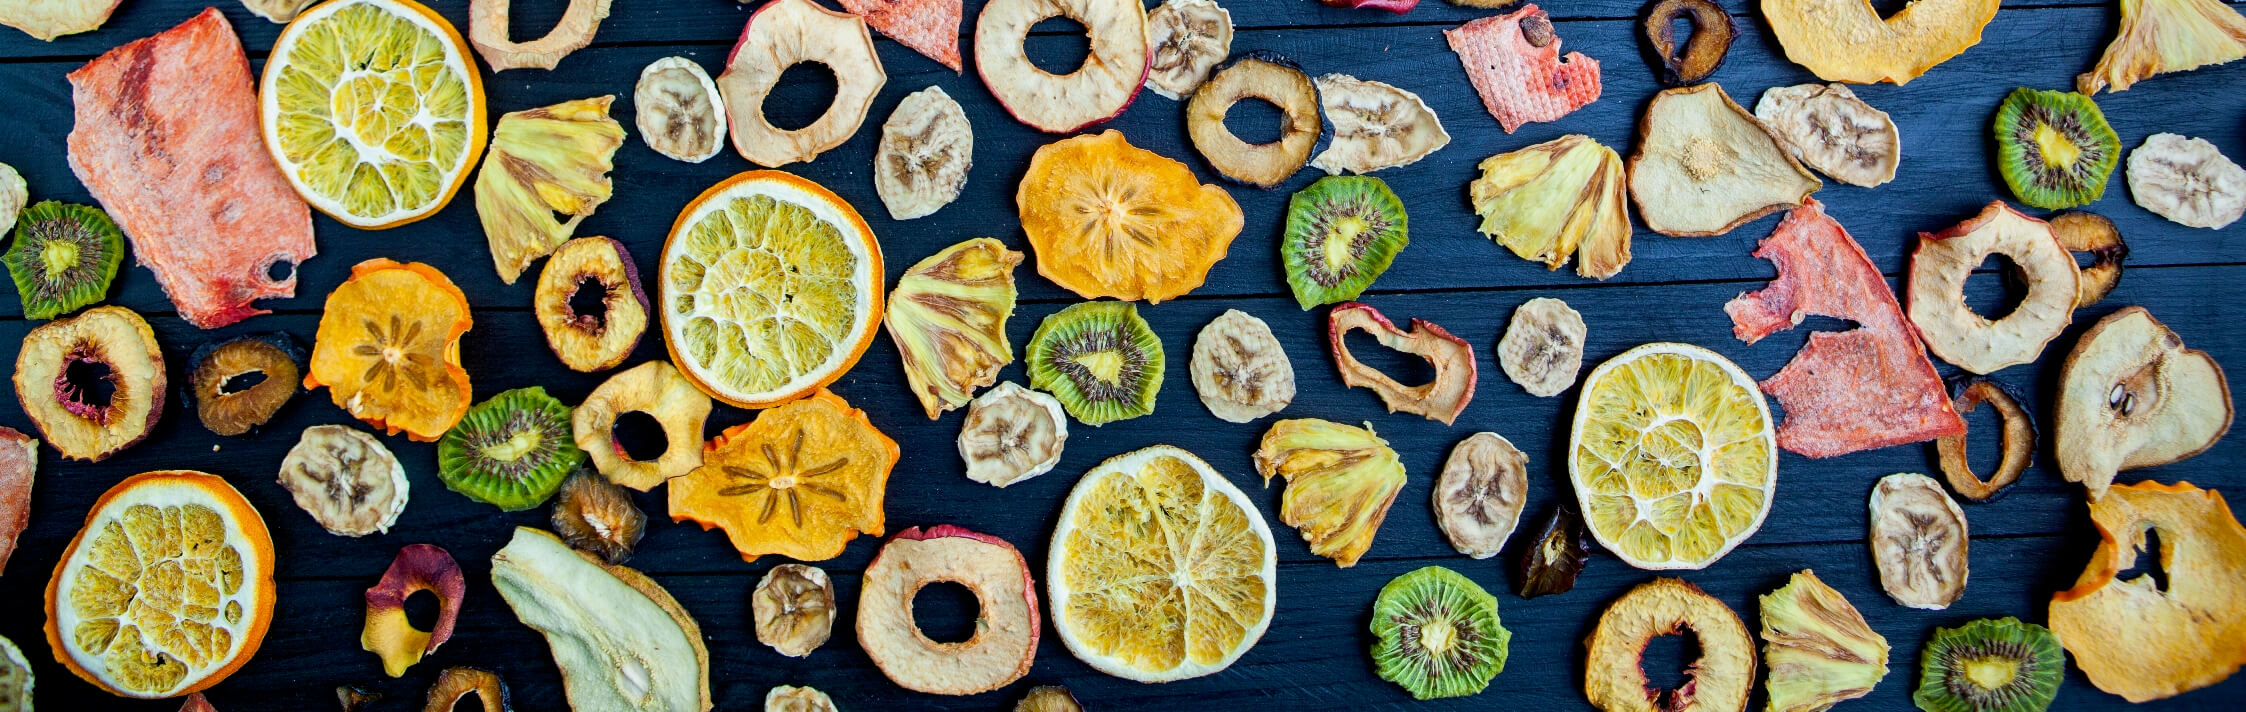 Image Of Dried Fruits